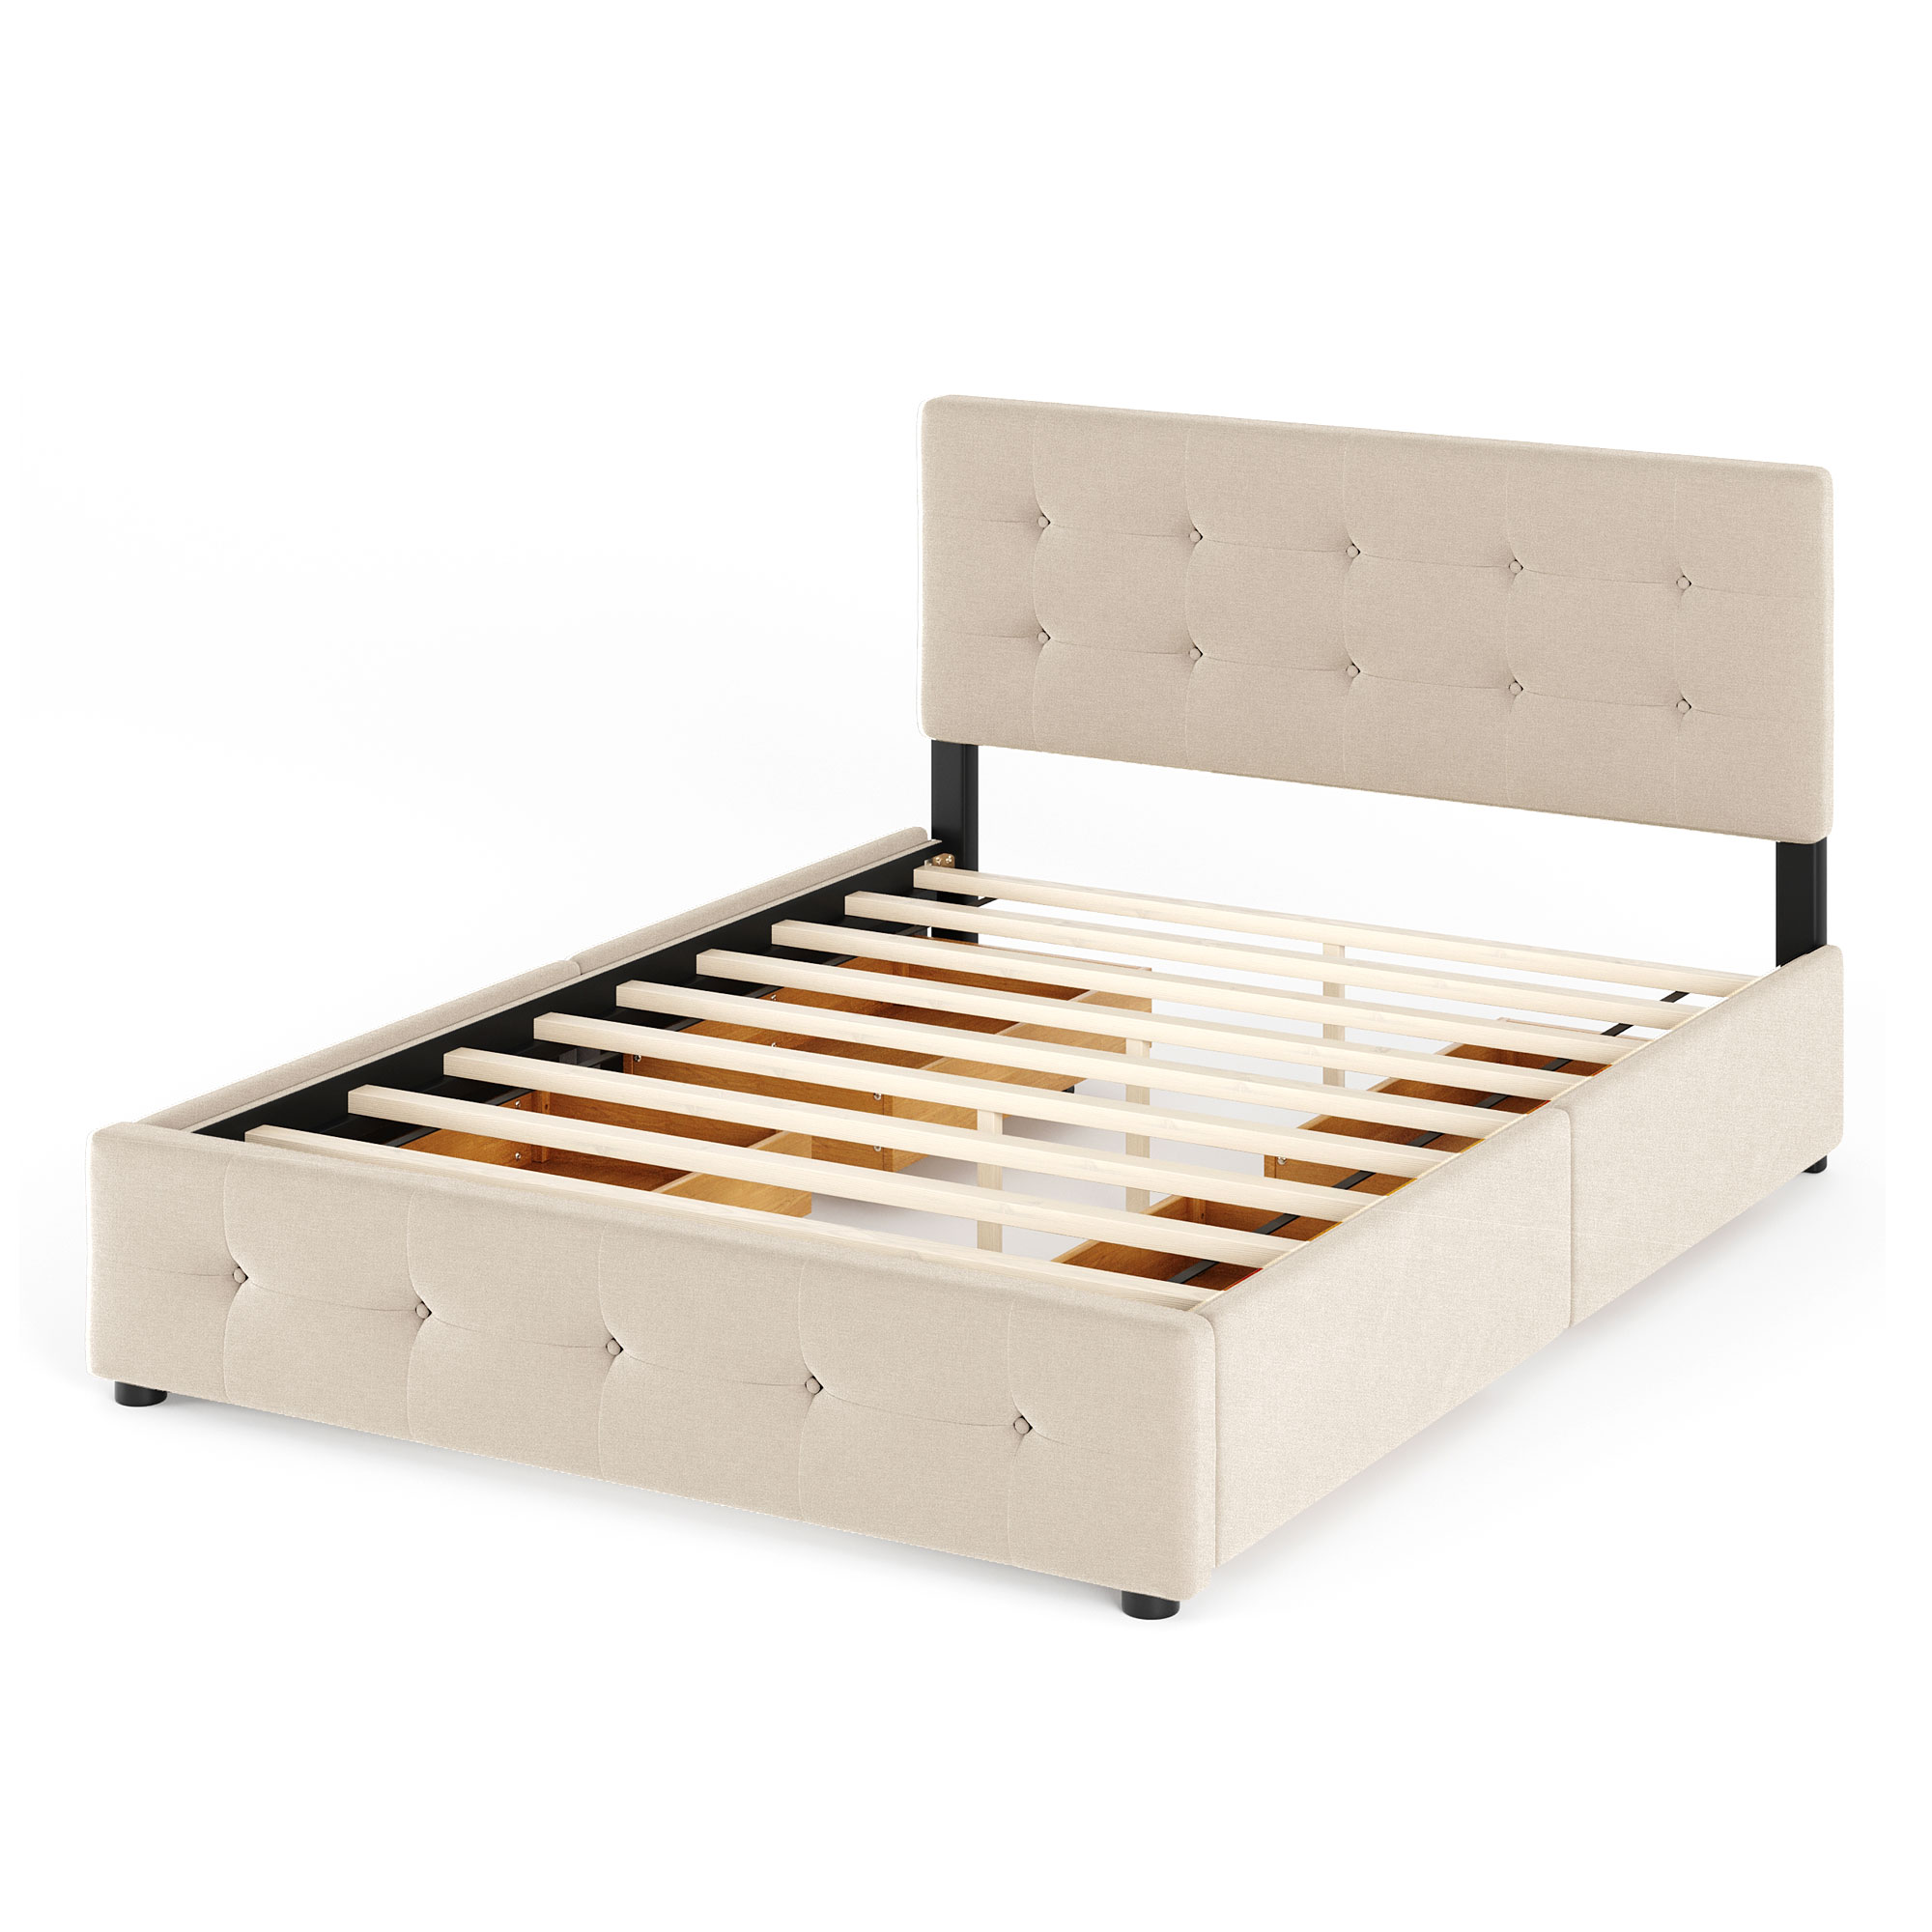 Queen Platform Bed Frame with Storage, New Upgraded Upholstered ...